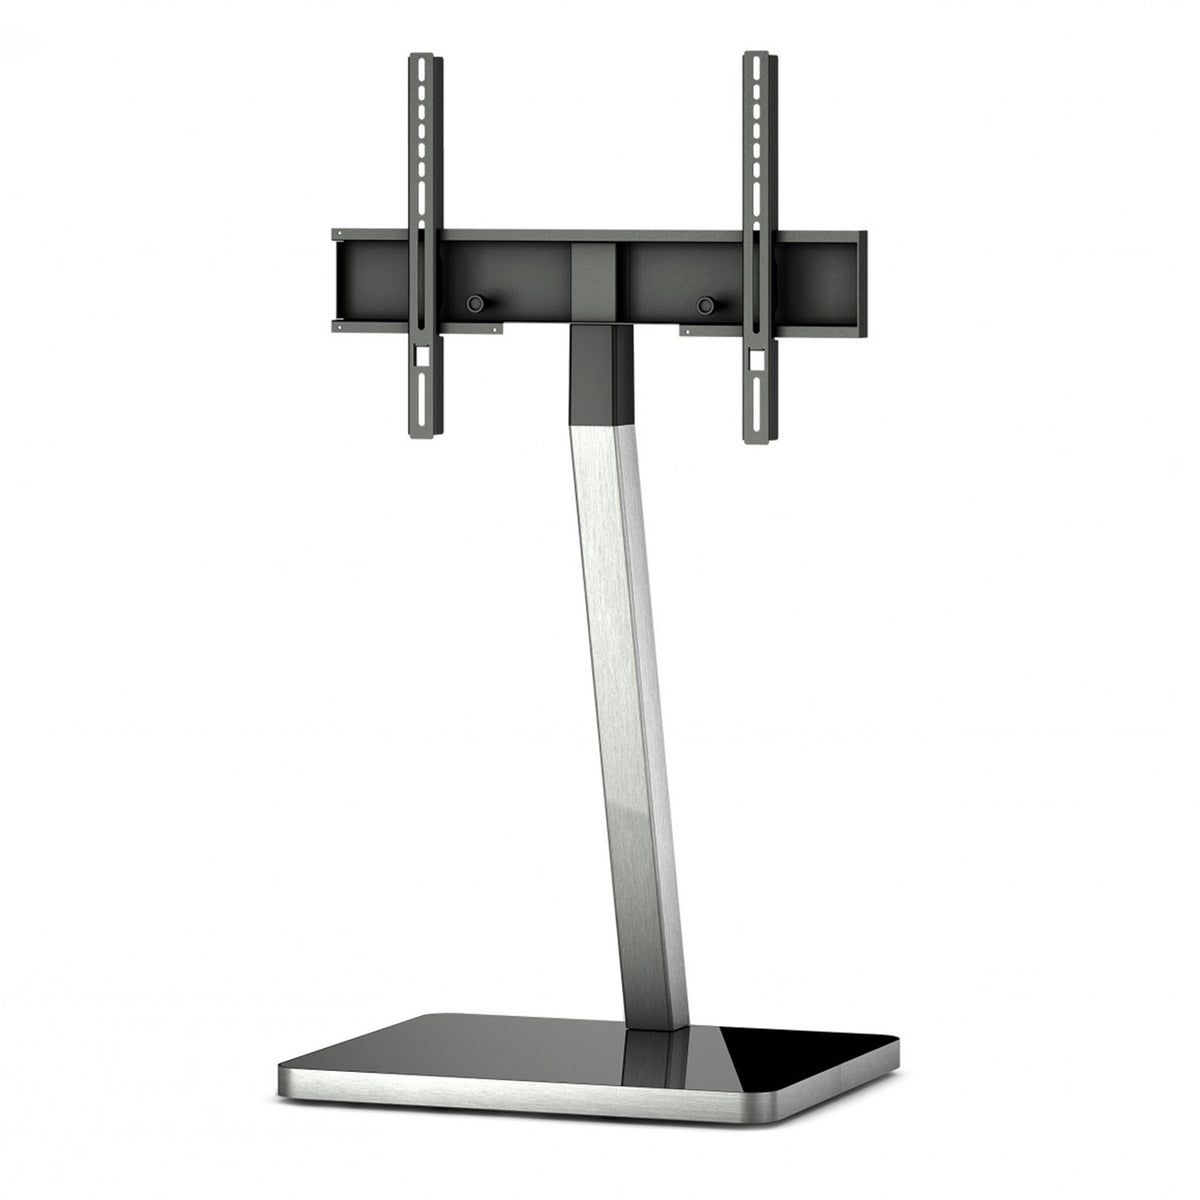 Sonorous PL-2700 Modern TV Floor Stand Mount / Bracket For Sizes up to 65" (Aluminum Construction)